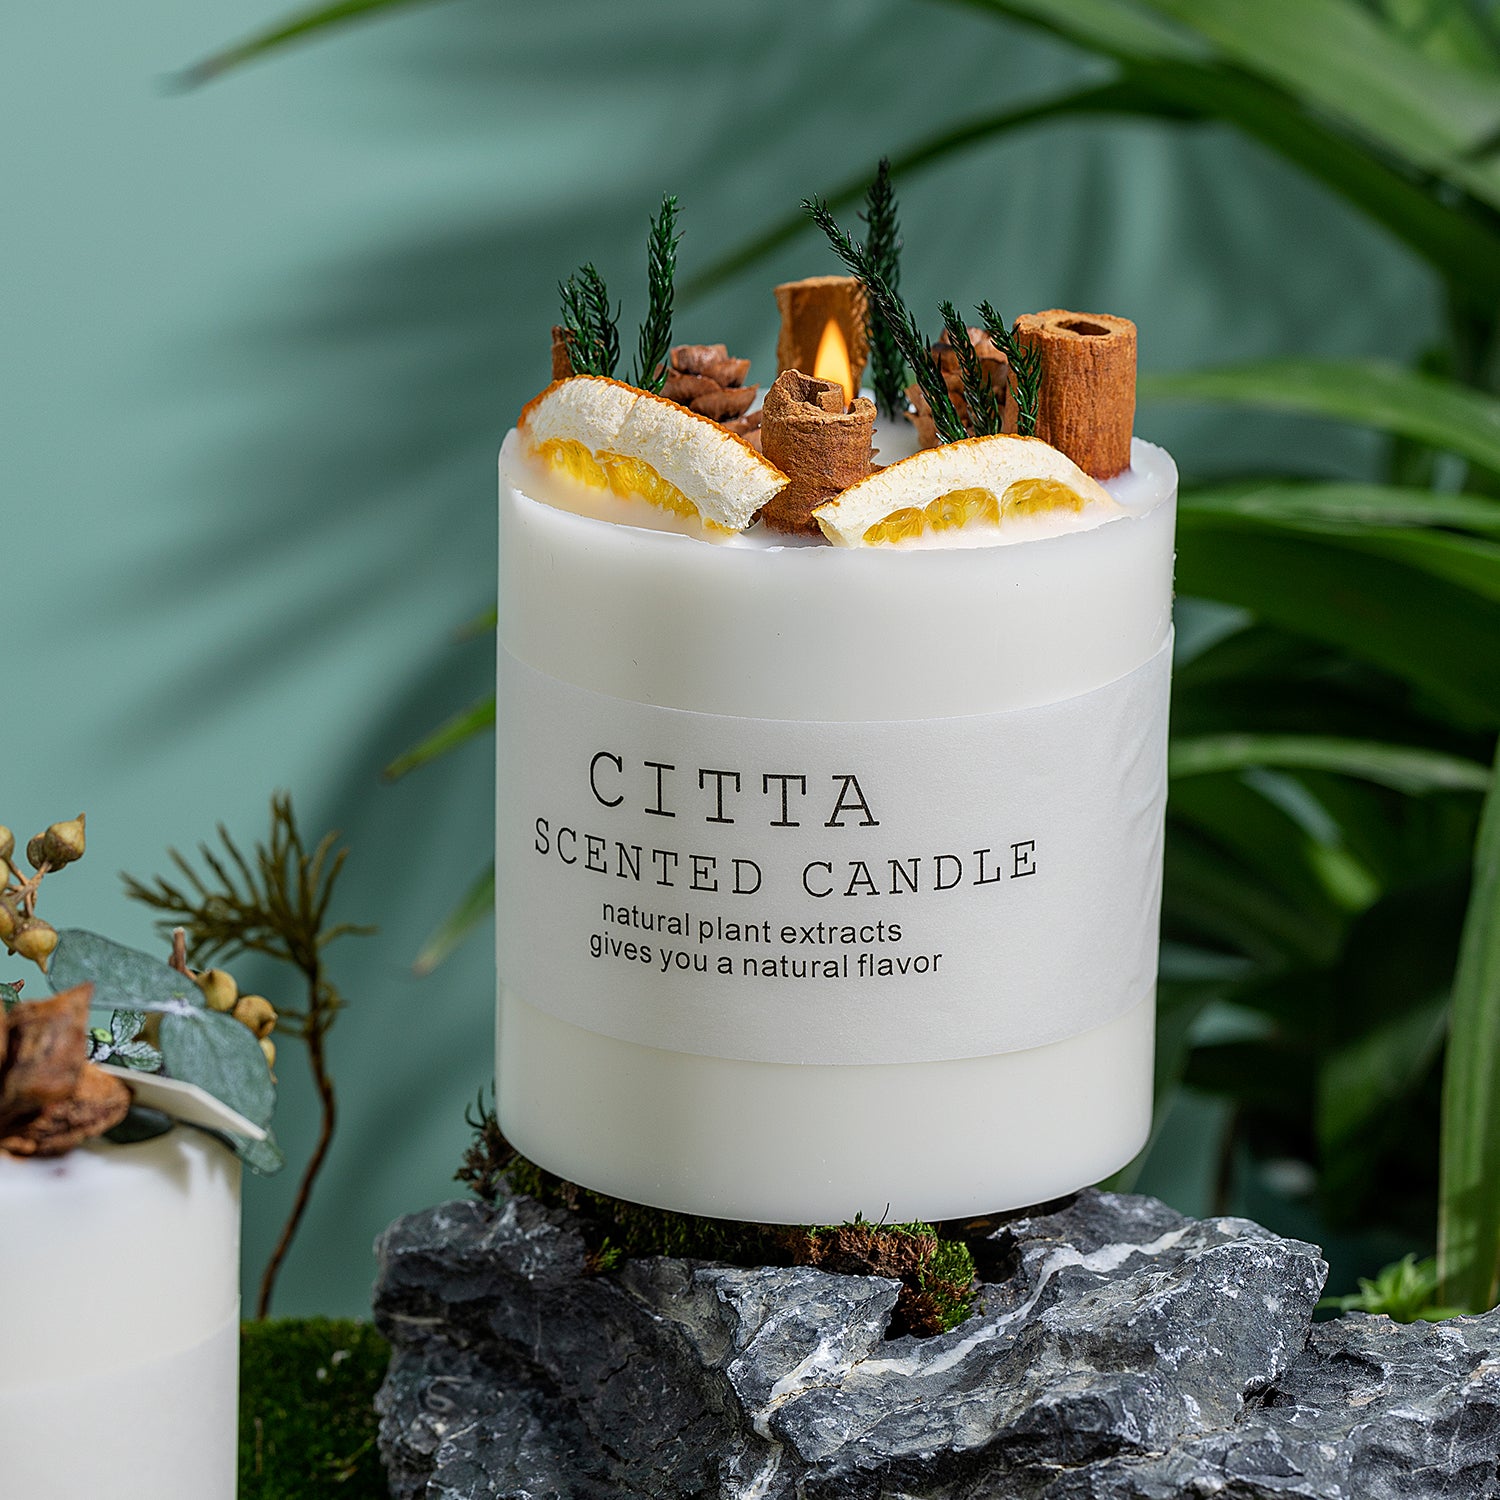 CITTA Forest Series Scented Candle 270G with Dry Flowers